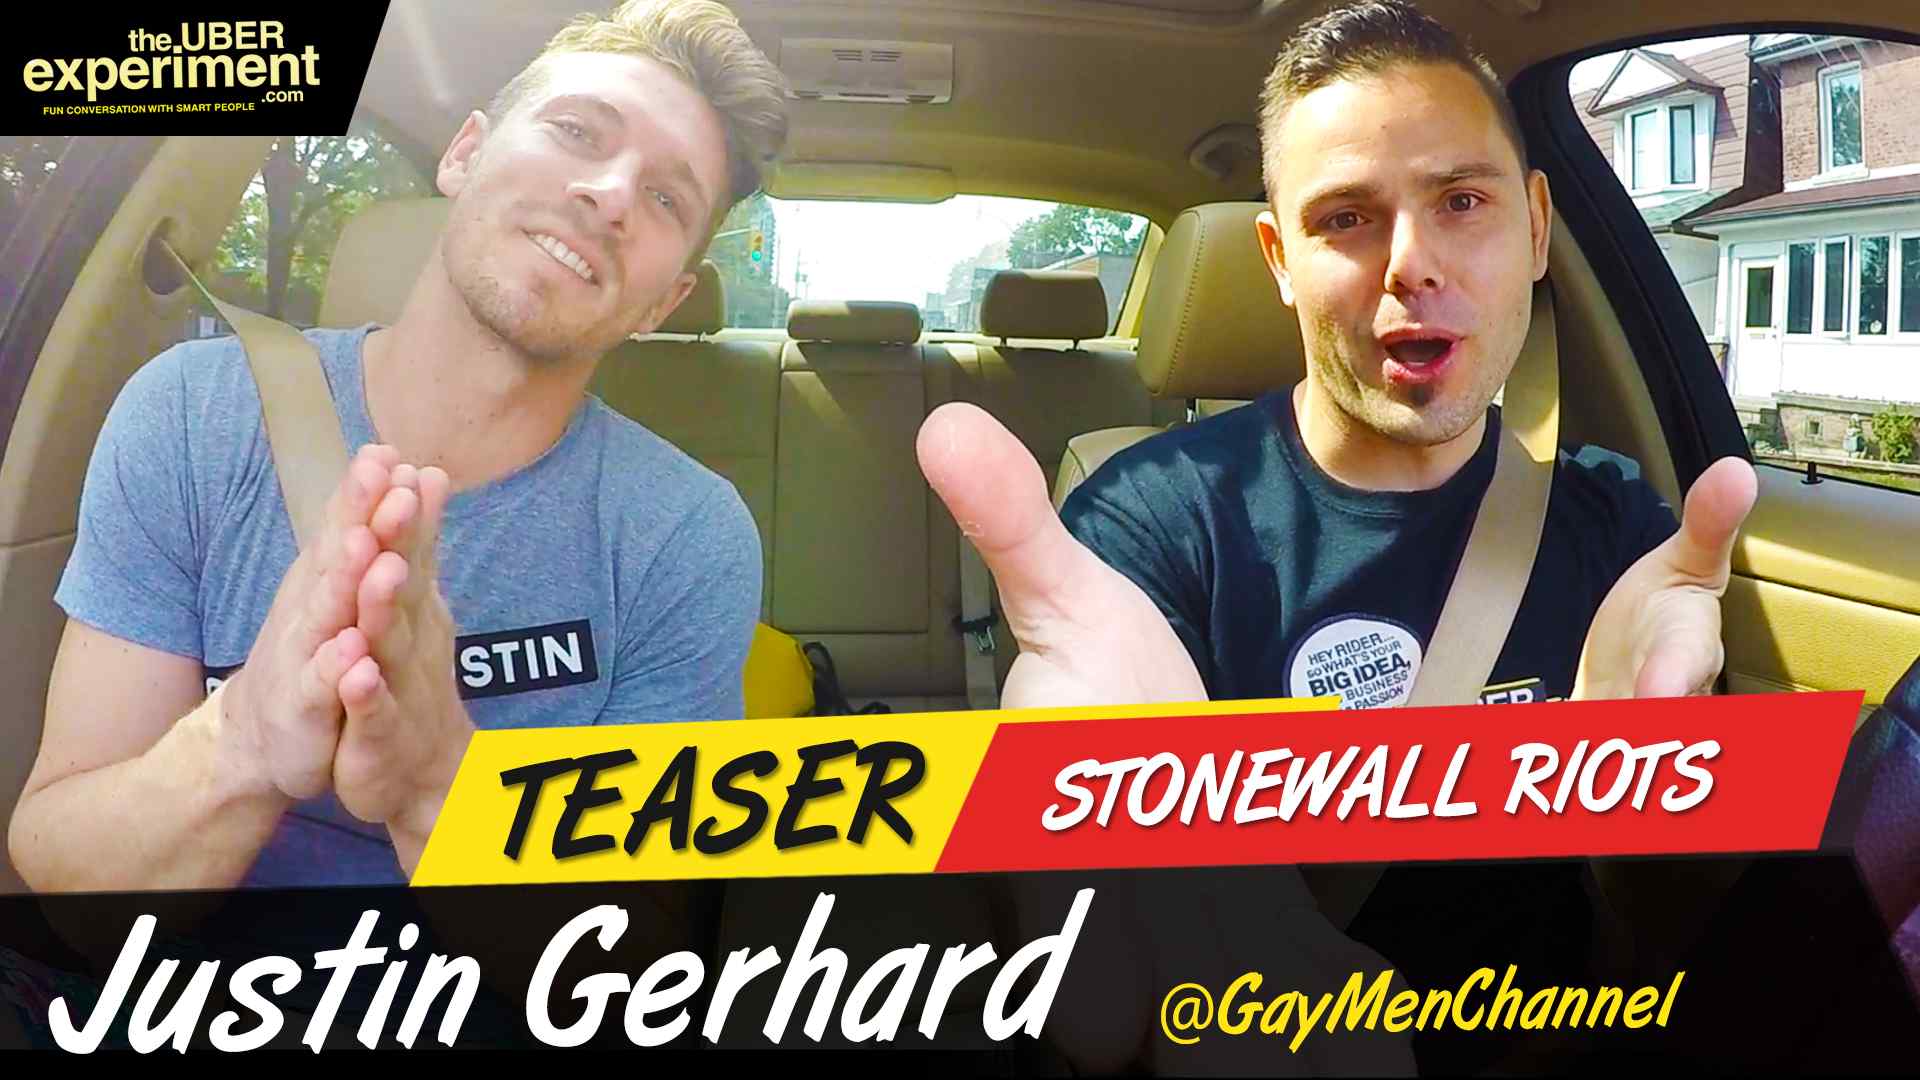 THE STONEWALL RIOTS - Justin Gerhard Host of The Gay Men Channel on The UBER Experiment Reality Show